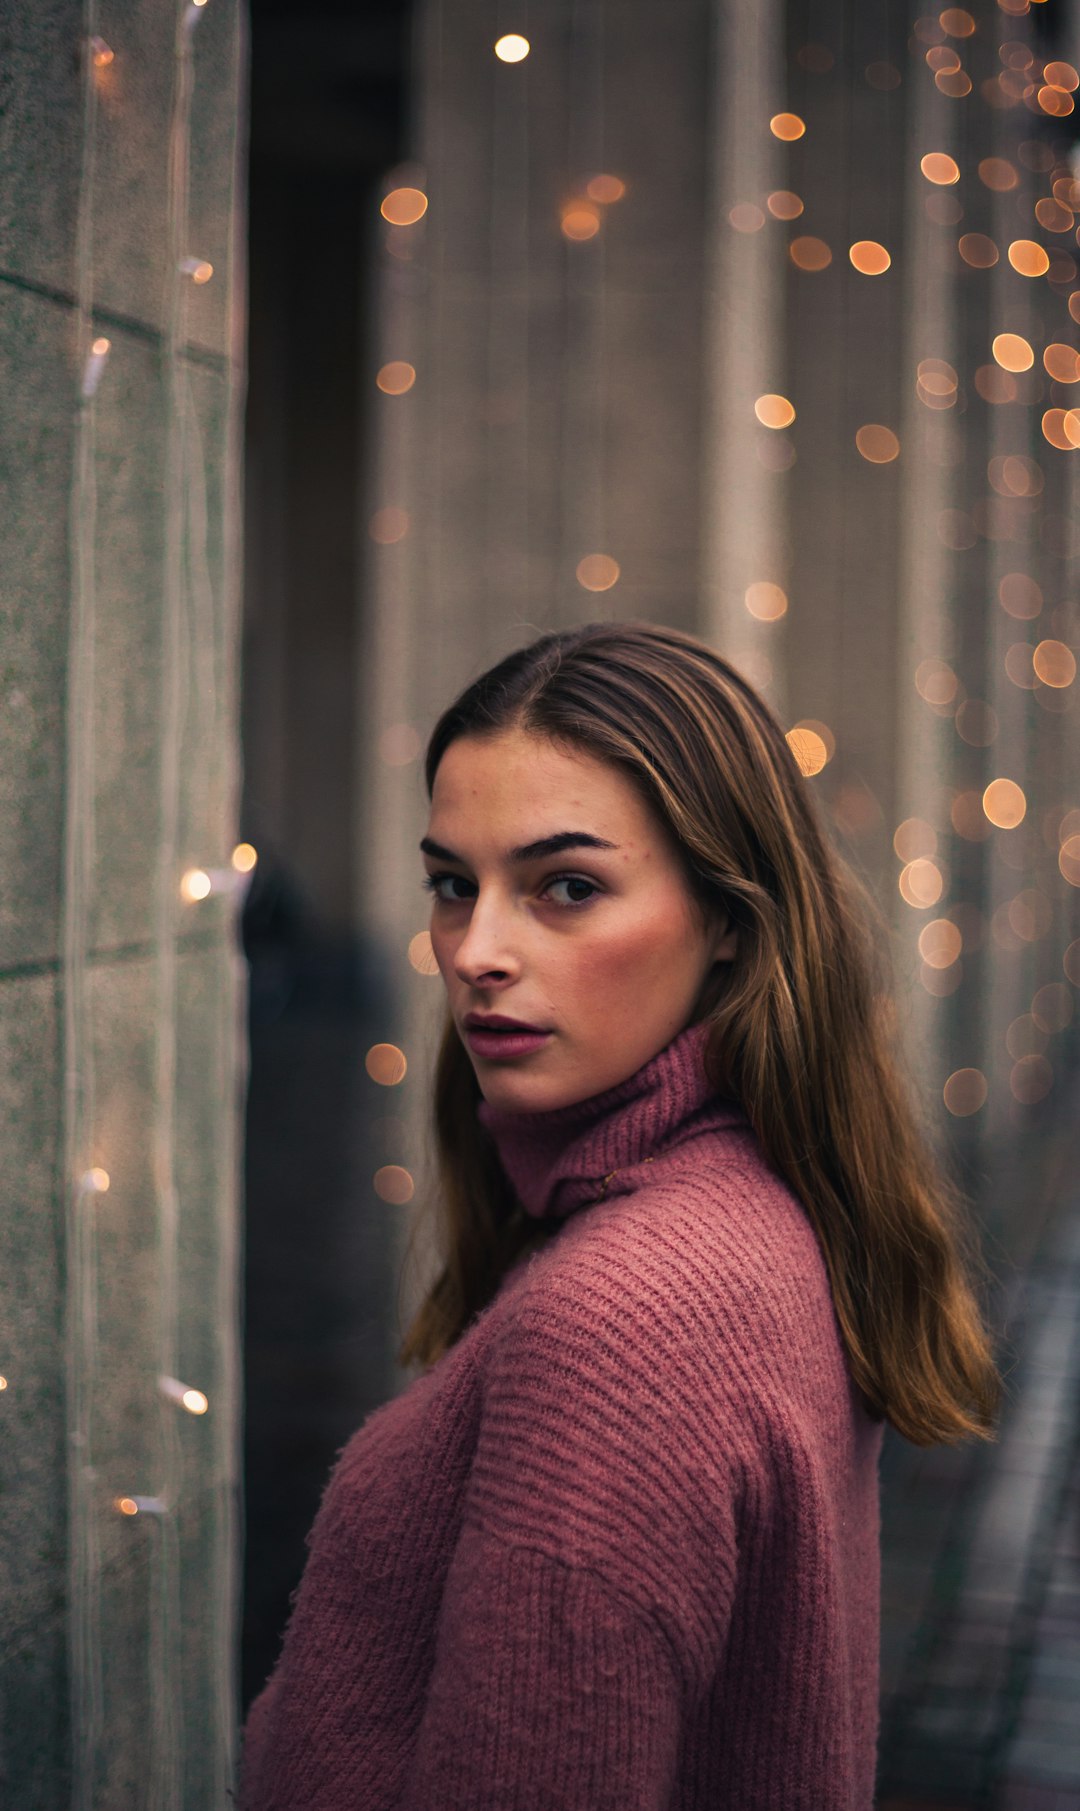 I tried my first time taking portraits with a beautiful friend of mine which is in the same school as I. Loved the wintervibes with the lights in the background. Also a good example of nobody’s perfect. I could have photoshopped some imperfections away, but decided to not do it.